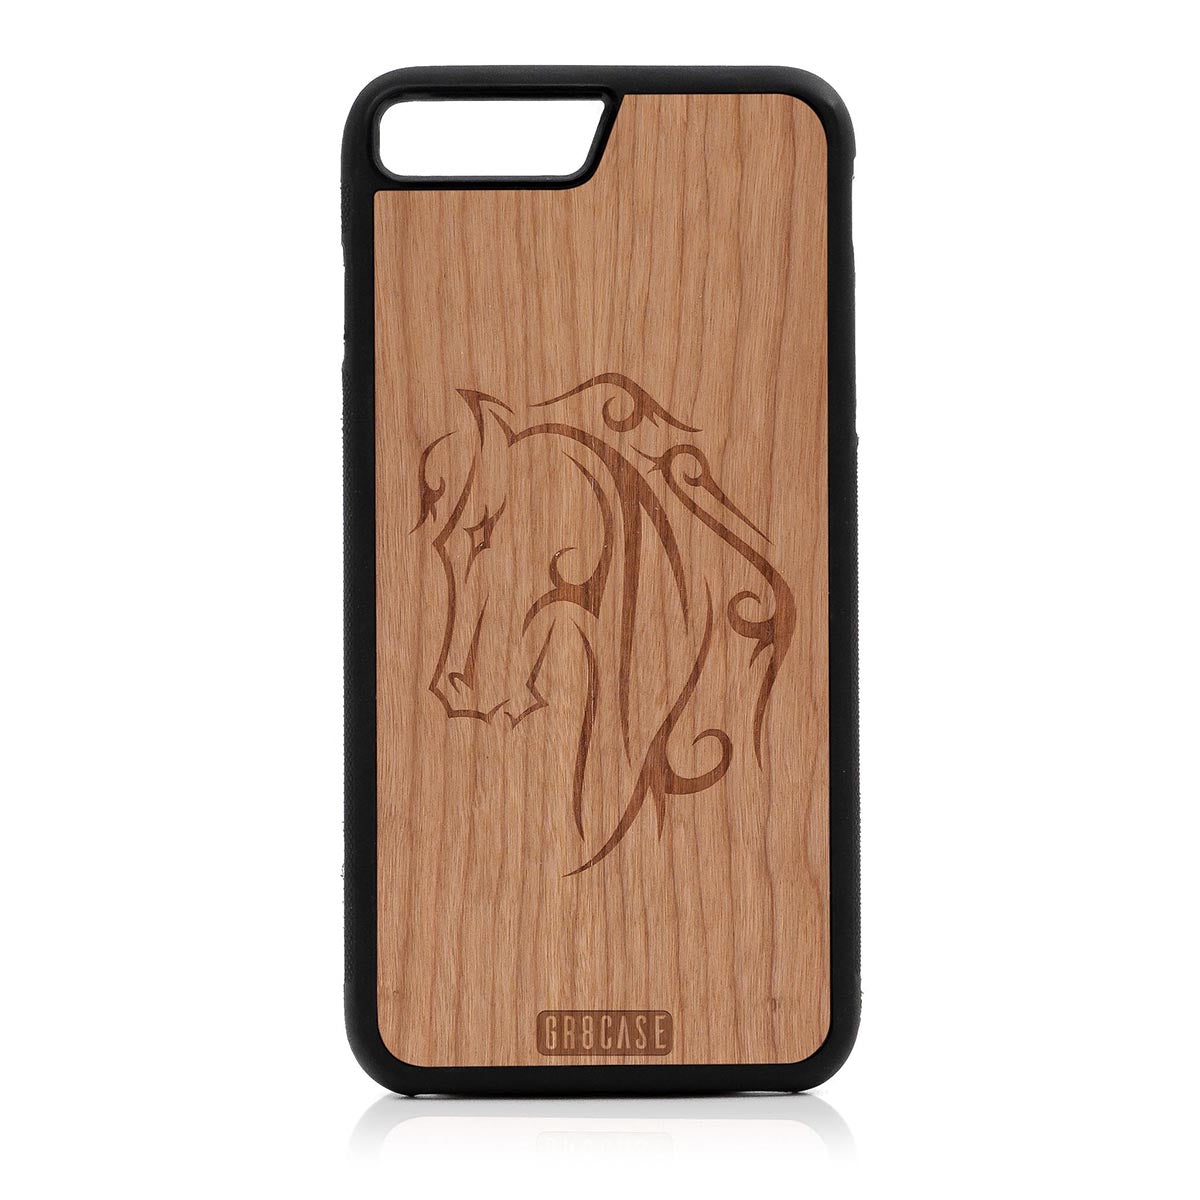 Horse Tattoo Design Wood Case For iPhone 7 Plus / 8 Plus by GR8CASE